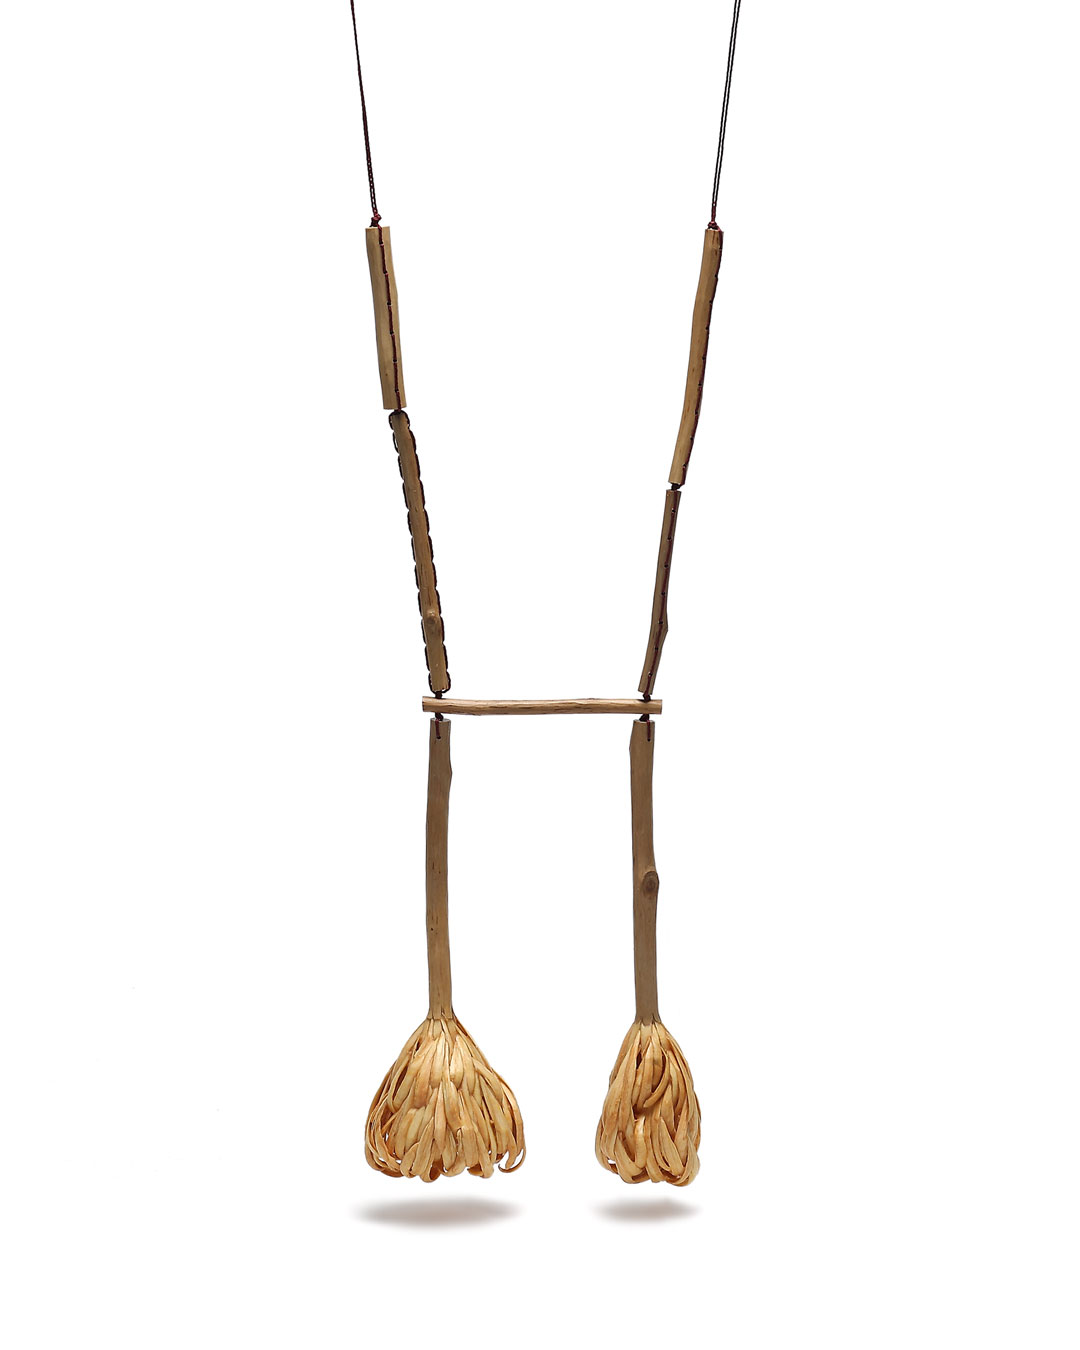 Dongchun Lee, Flourish Wither, 2014, necklace; wood, string, 110 x 170 x 55 mm, €2060